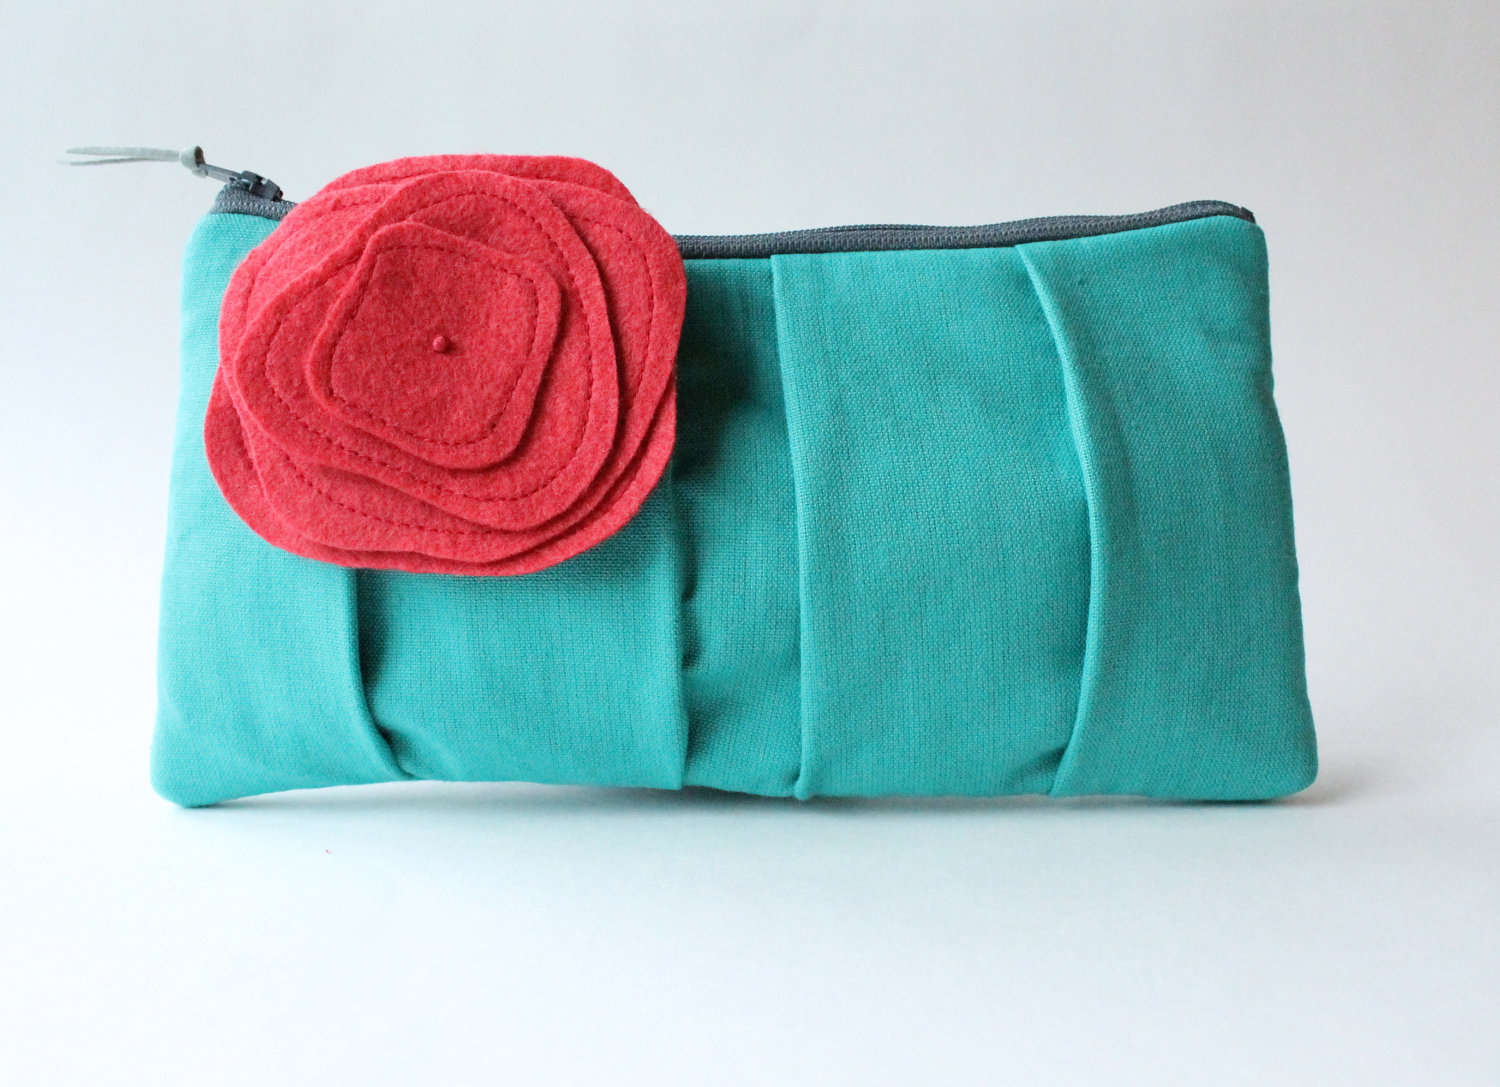 teal clutch purse with coral brooch pin flower | 7 Spring Wedding Clutches Your Girls Will Love via emmalinebride.com